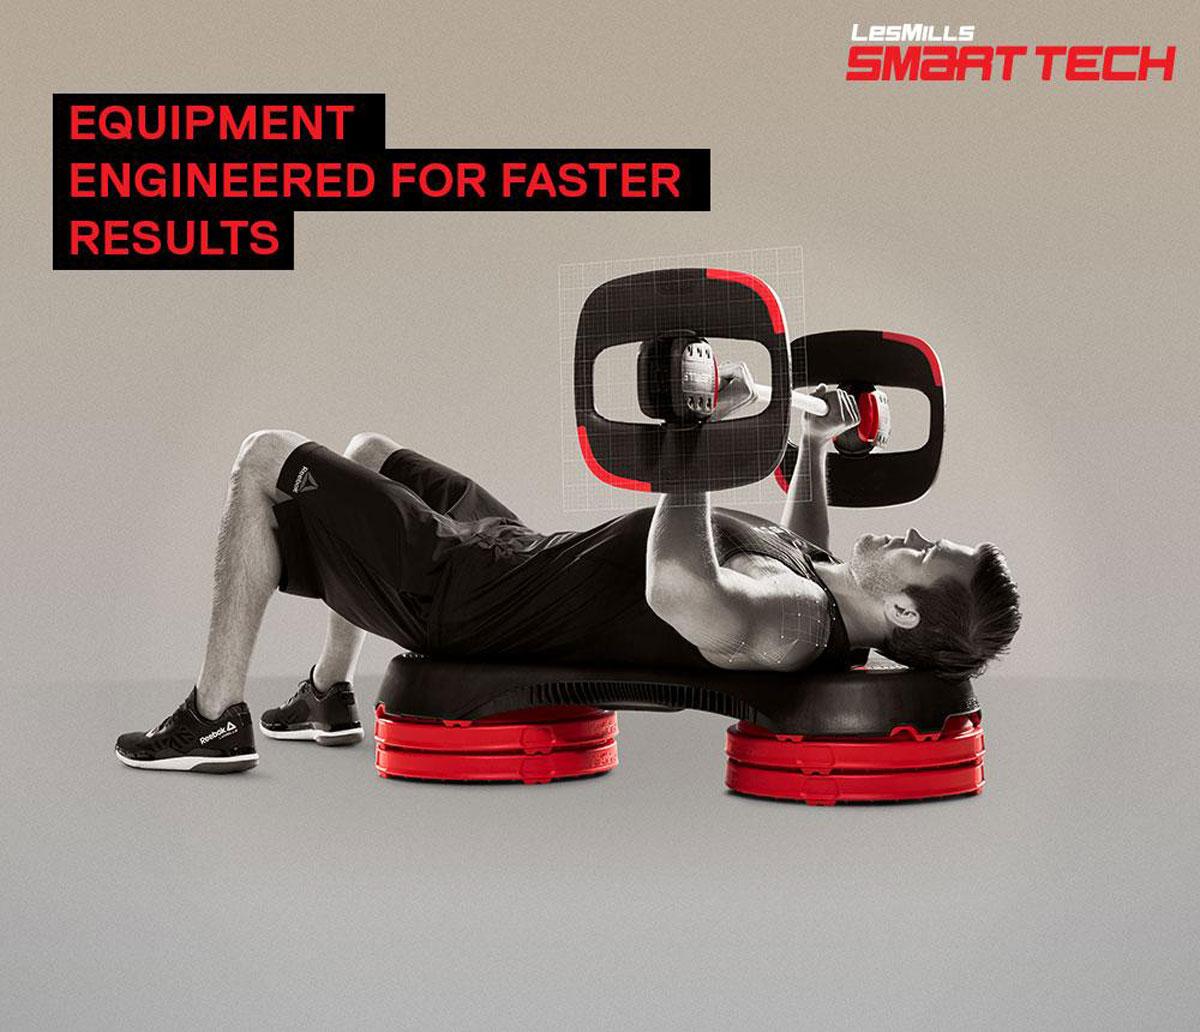 The Smart Tech equipment is designed to help users achieve better results 